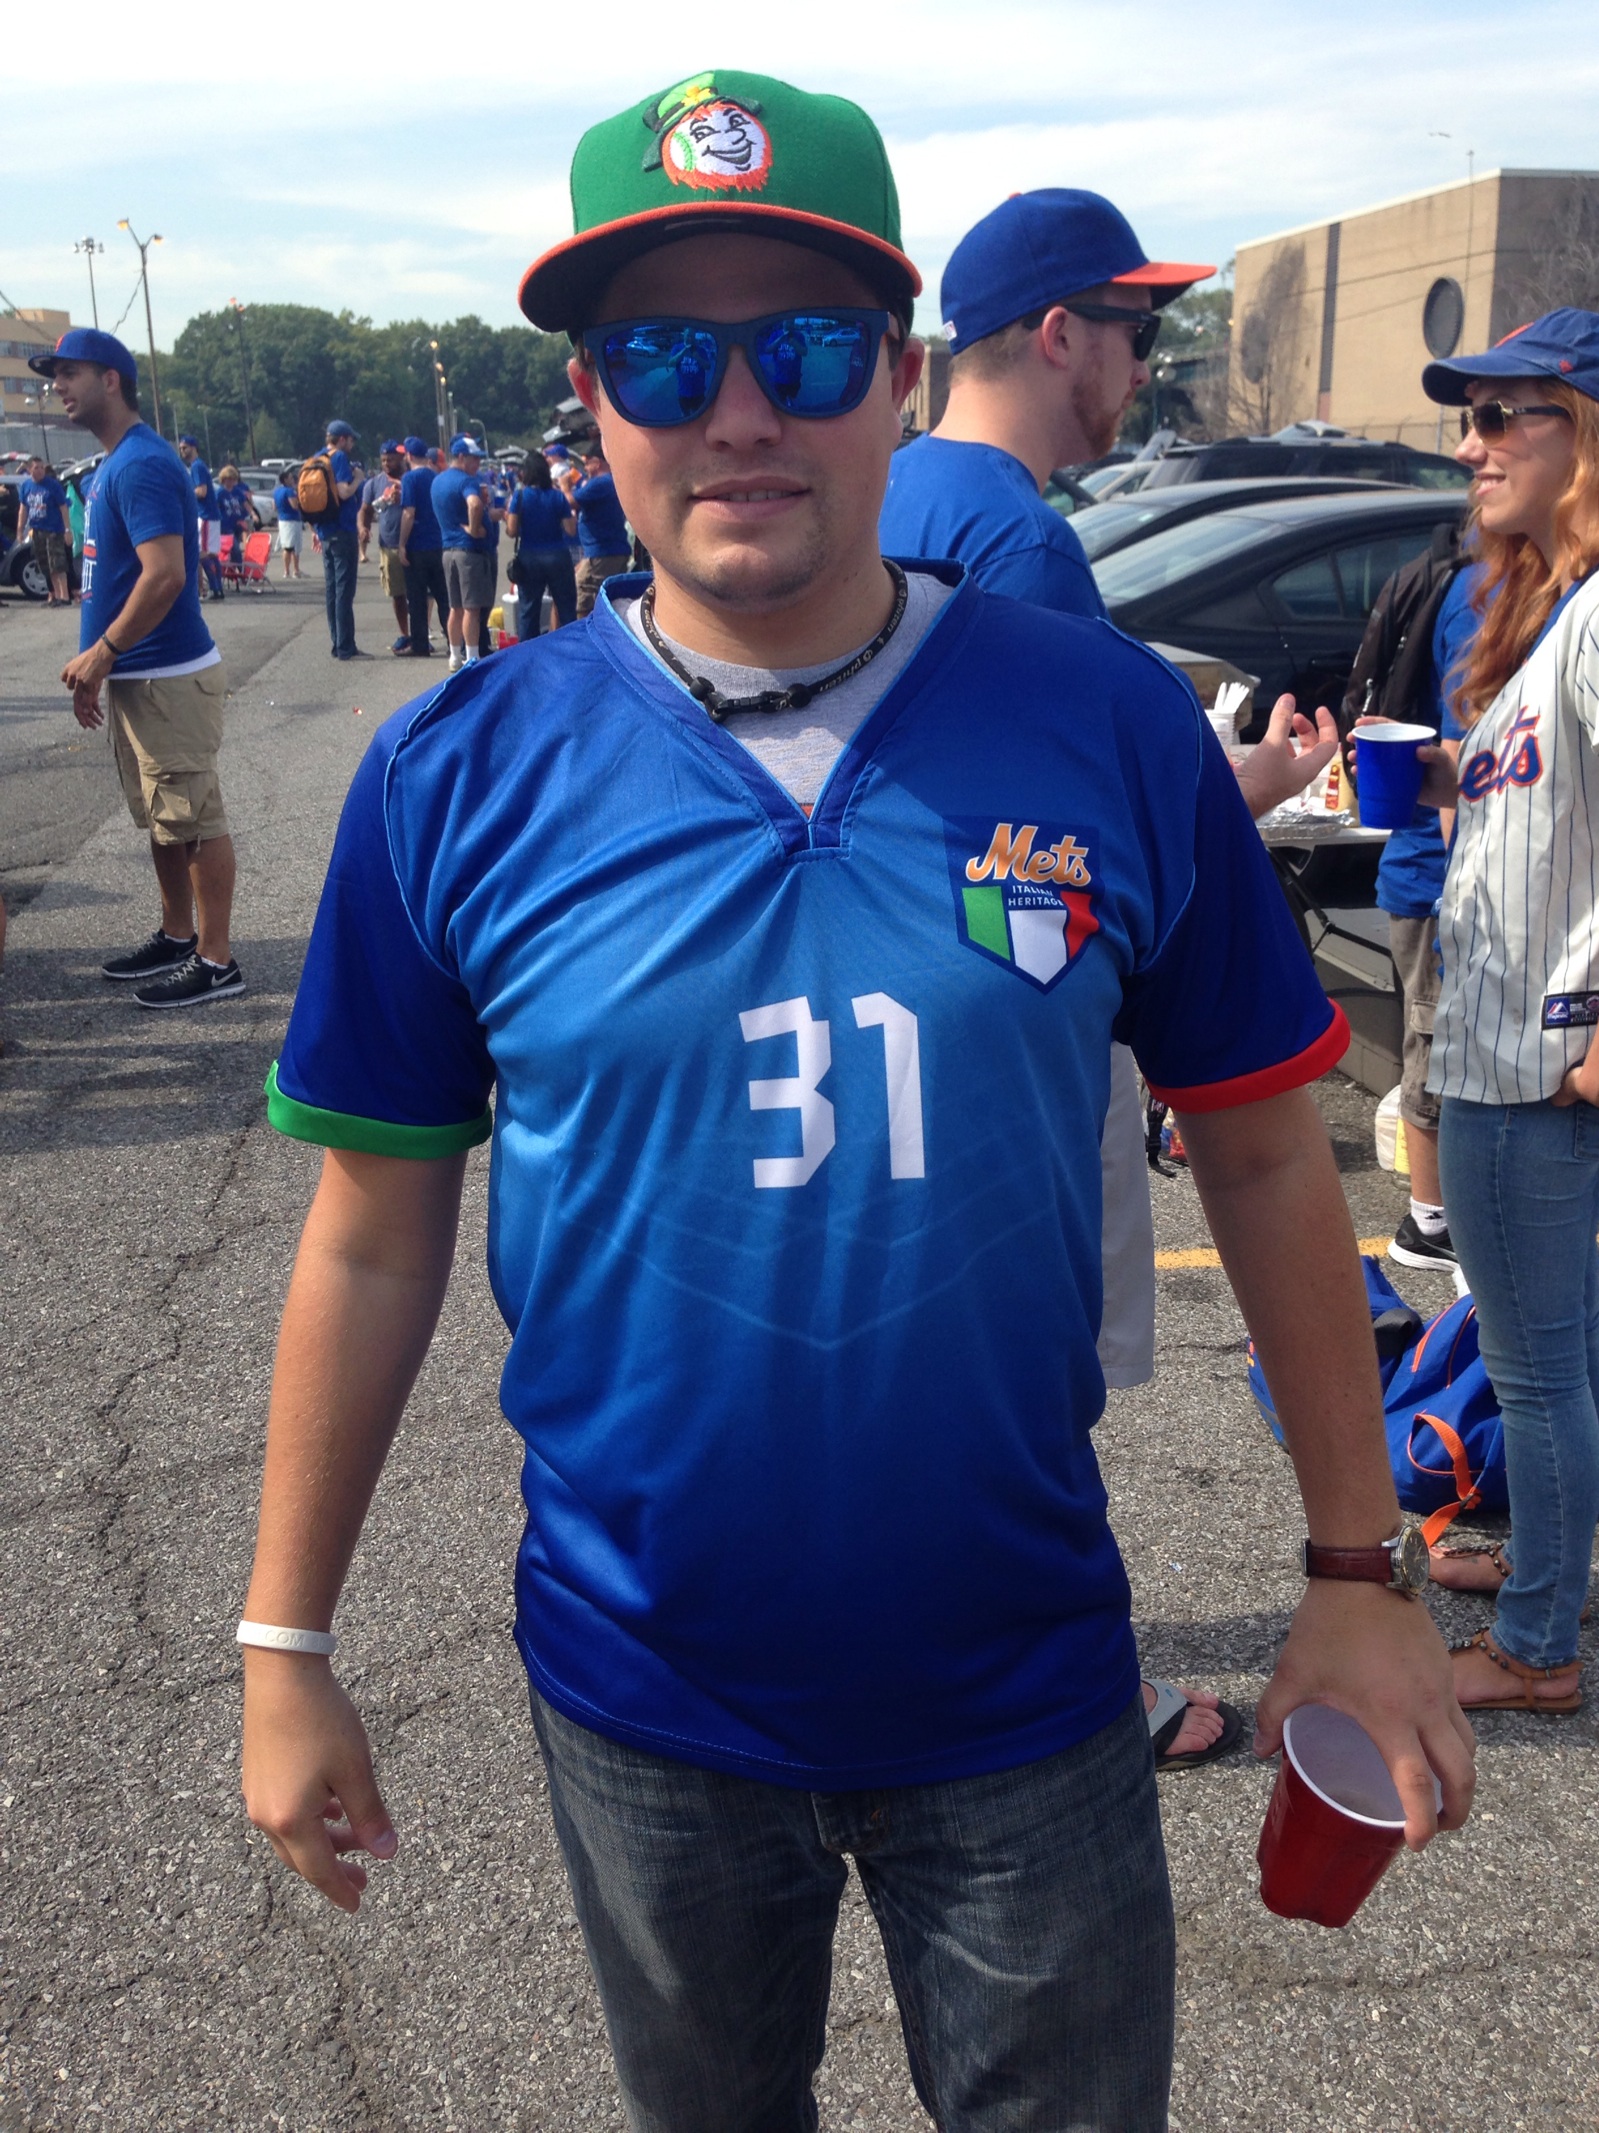 The Piazza Soccer Jersey Giveaway - The Mets Police